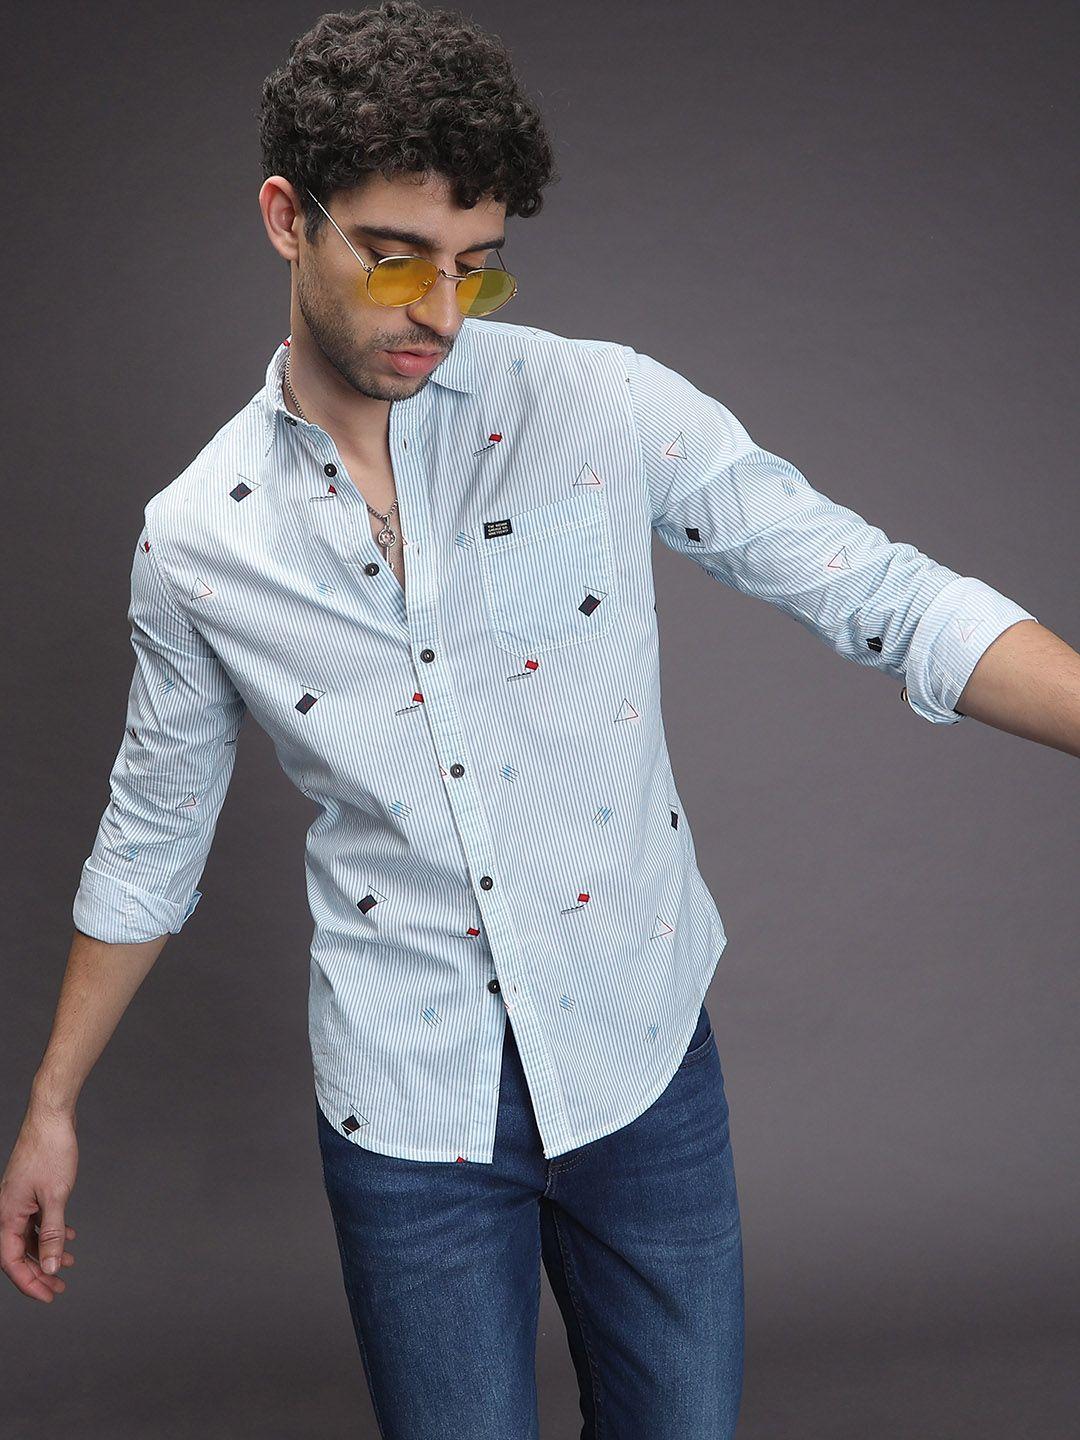 the-indian-garage-co-men-blue-&-white-slim-fit-striped-casual-shirt